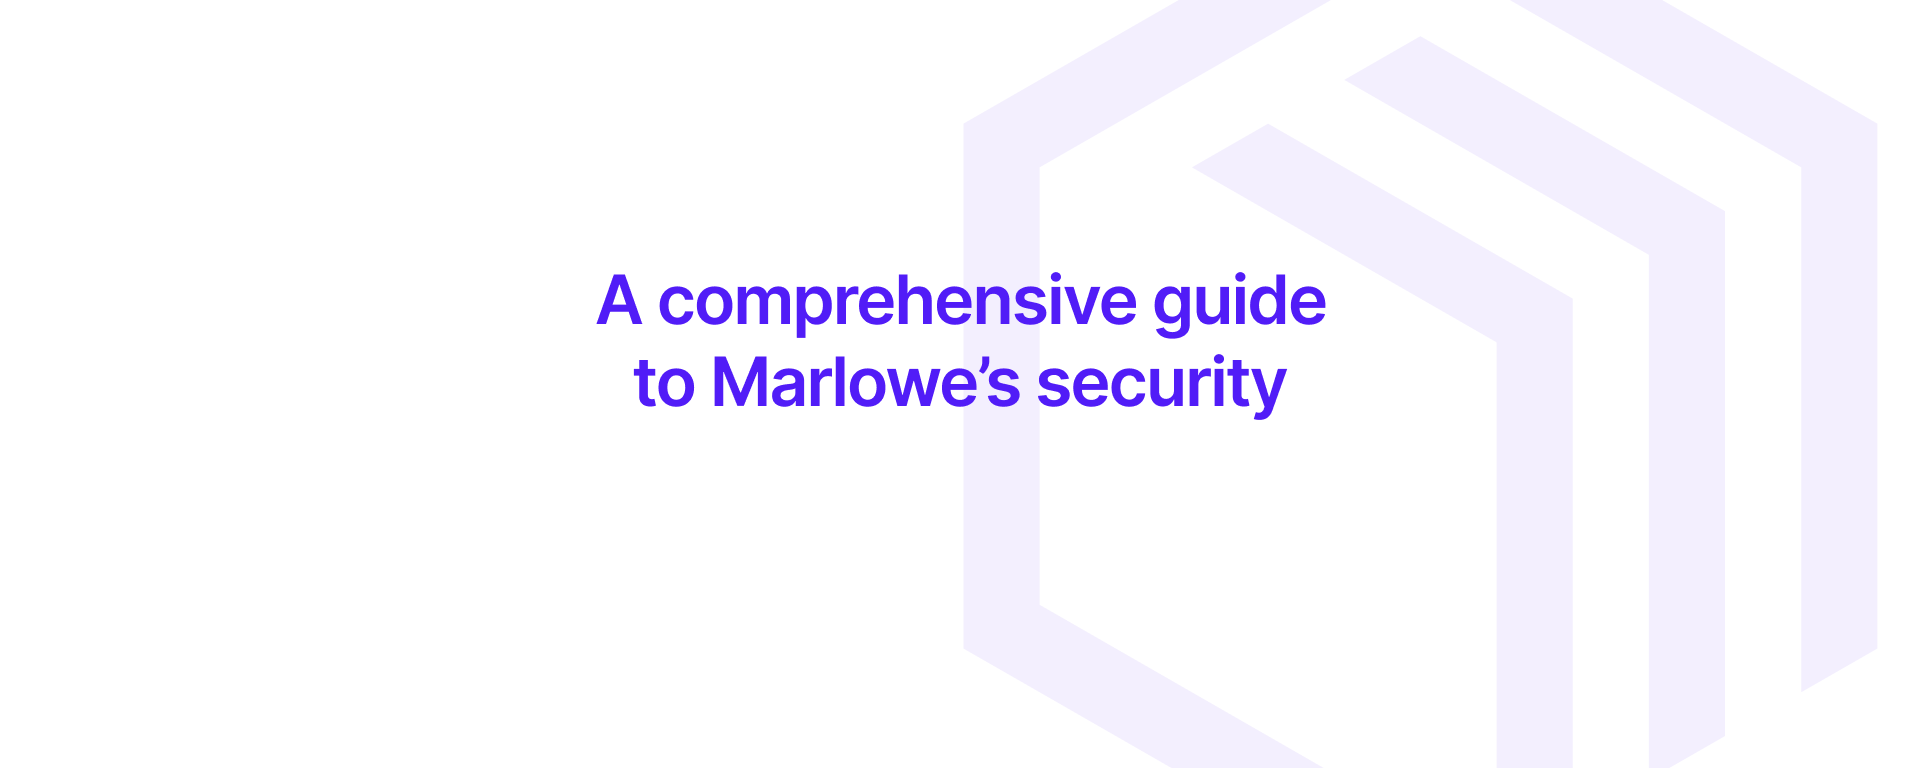 A comprehensive guide to Marlowe's security: audit outcomes, built-in functional restrictions, and ledger security features